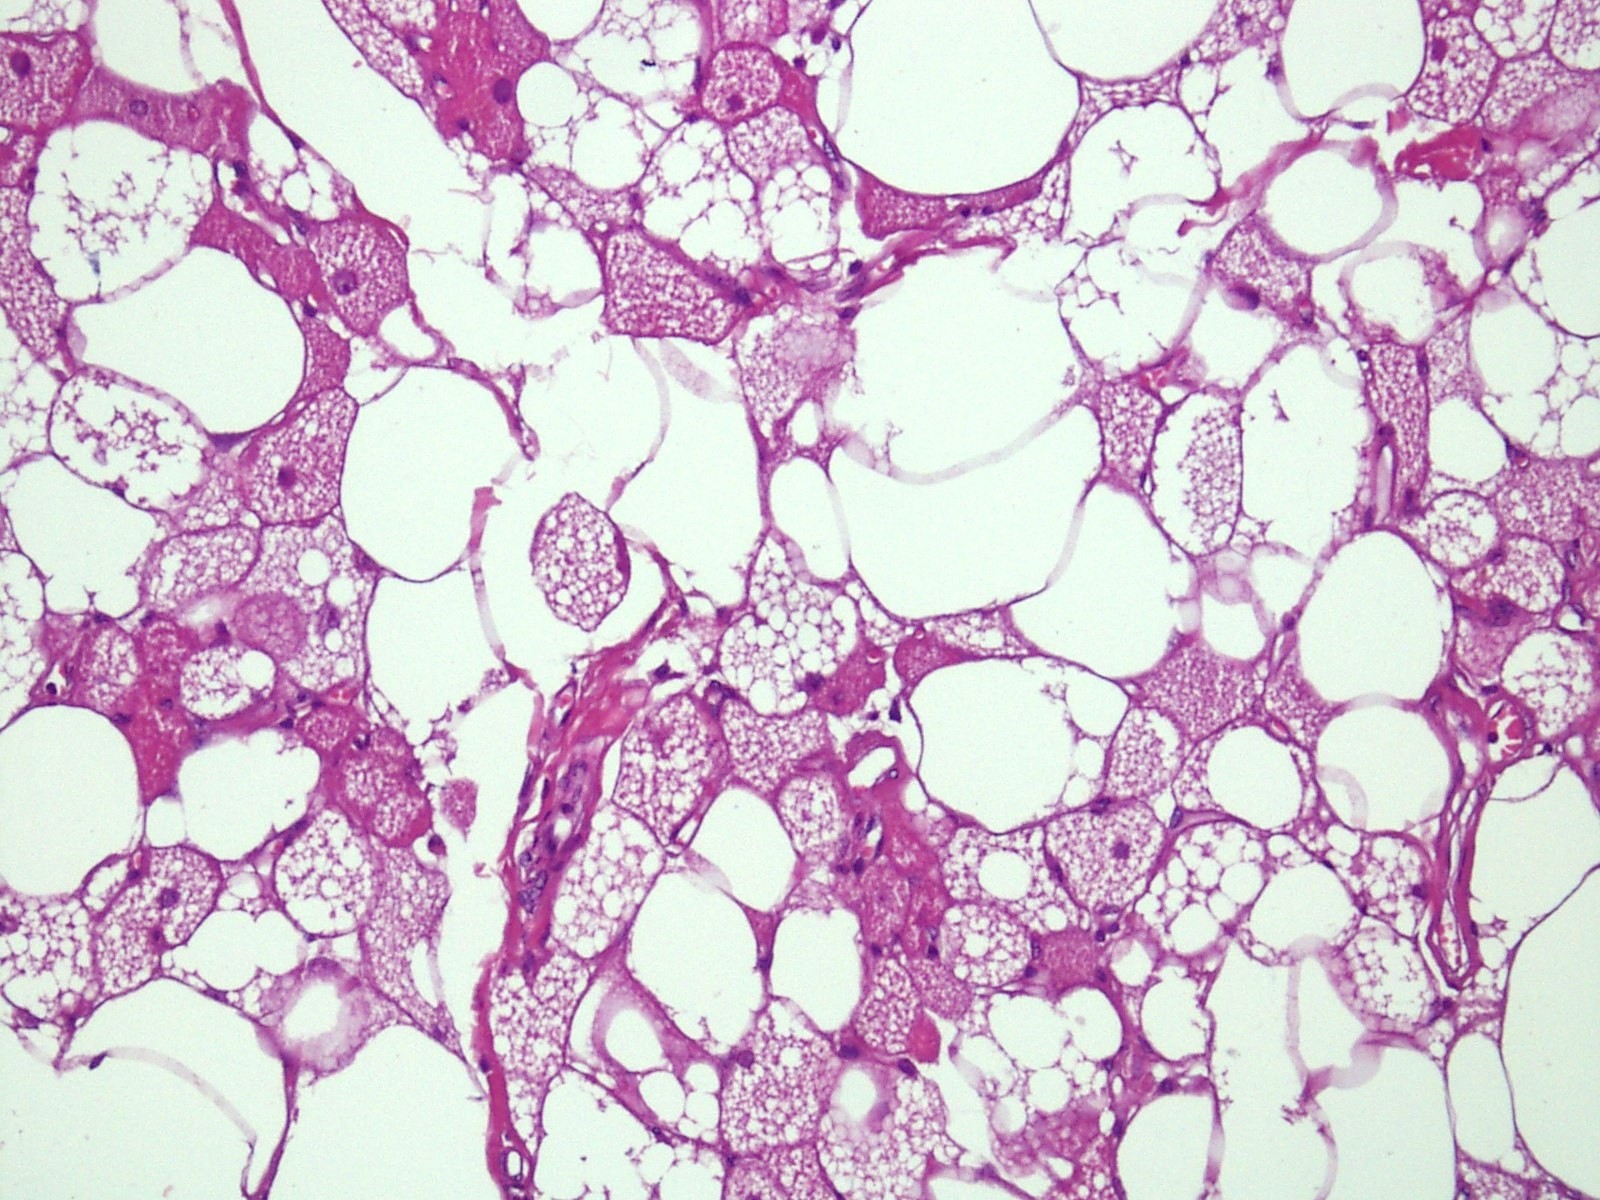 Mixture of brown and white fat cells